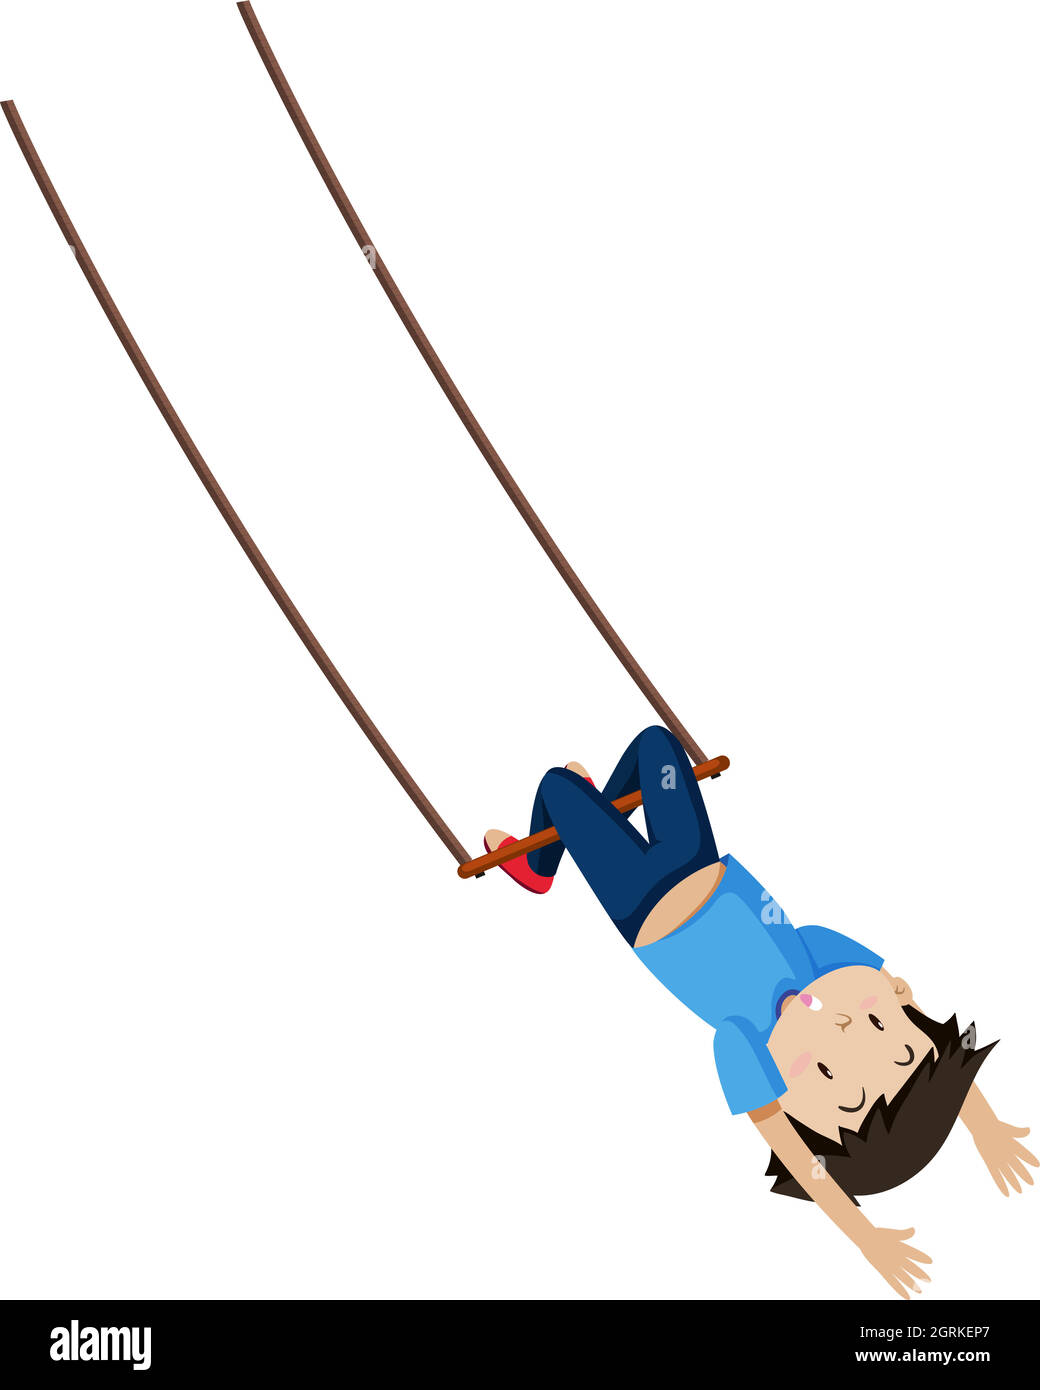 A Boy on Trapeze Swing Stock Vector